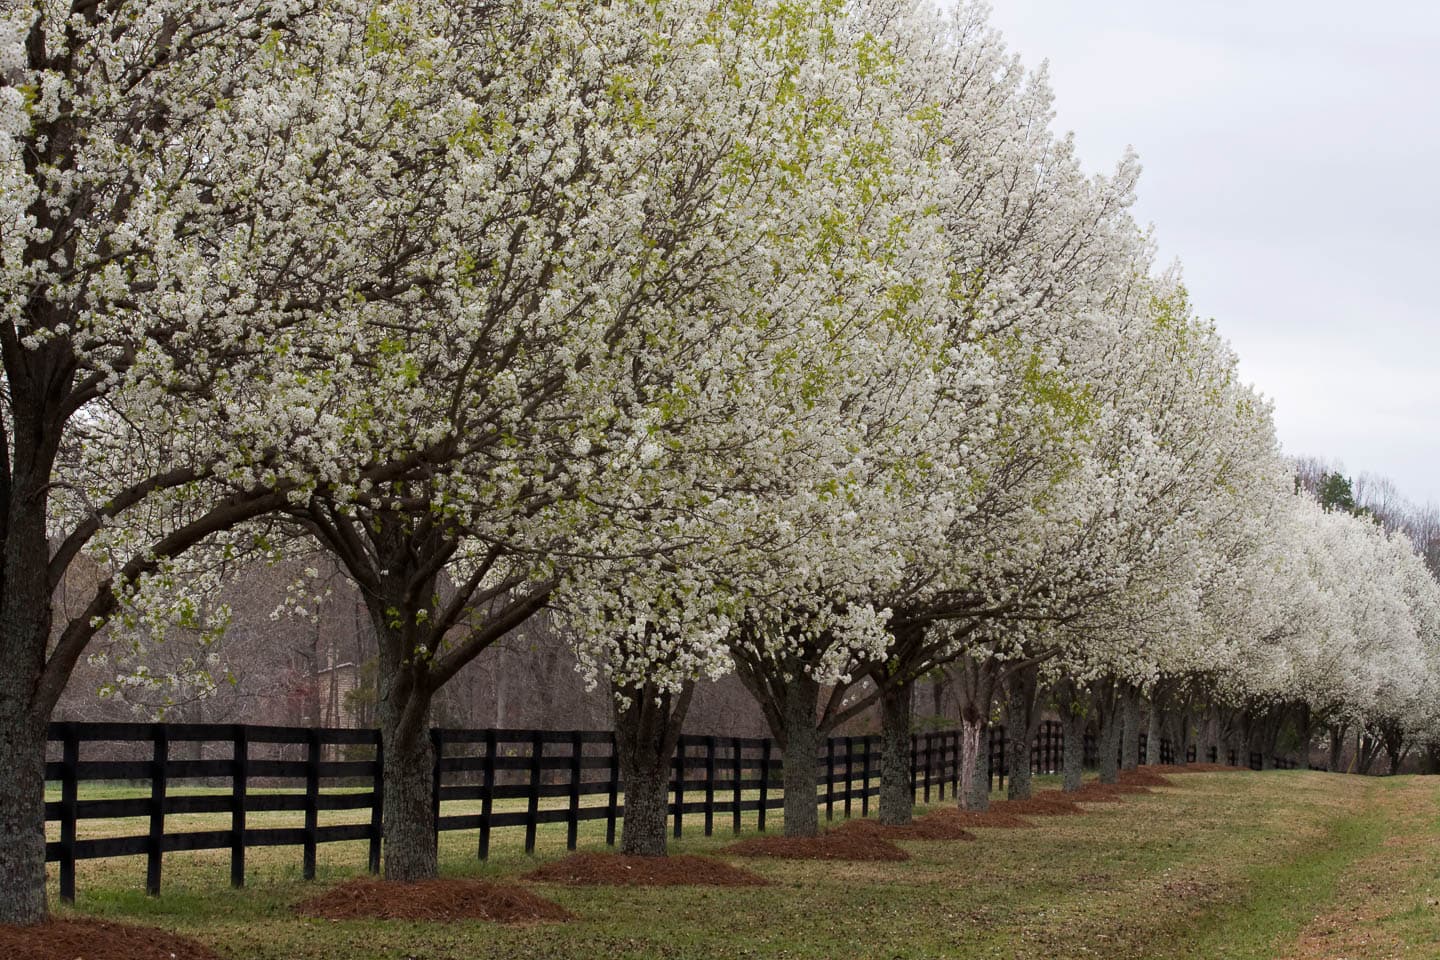 A row of Bradford pear trees in bloom in the early spring